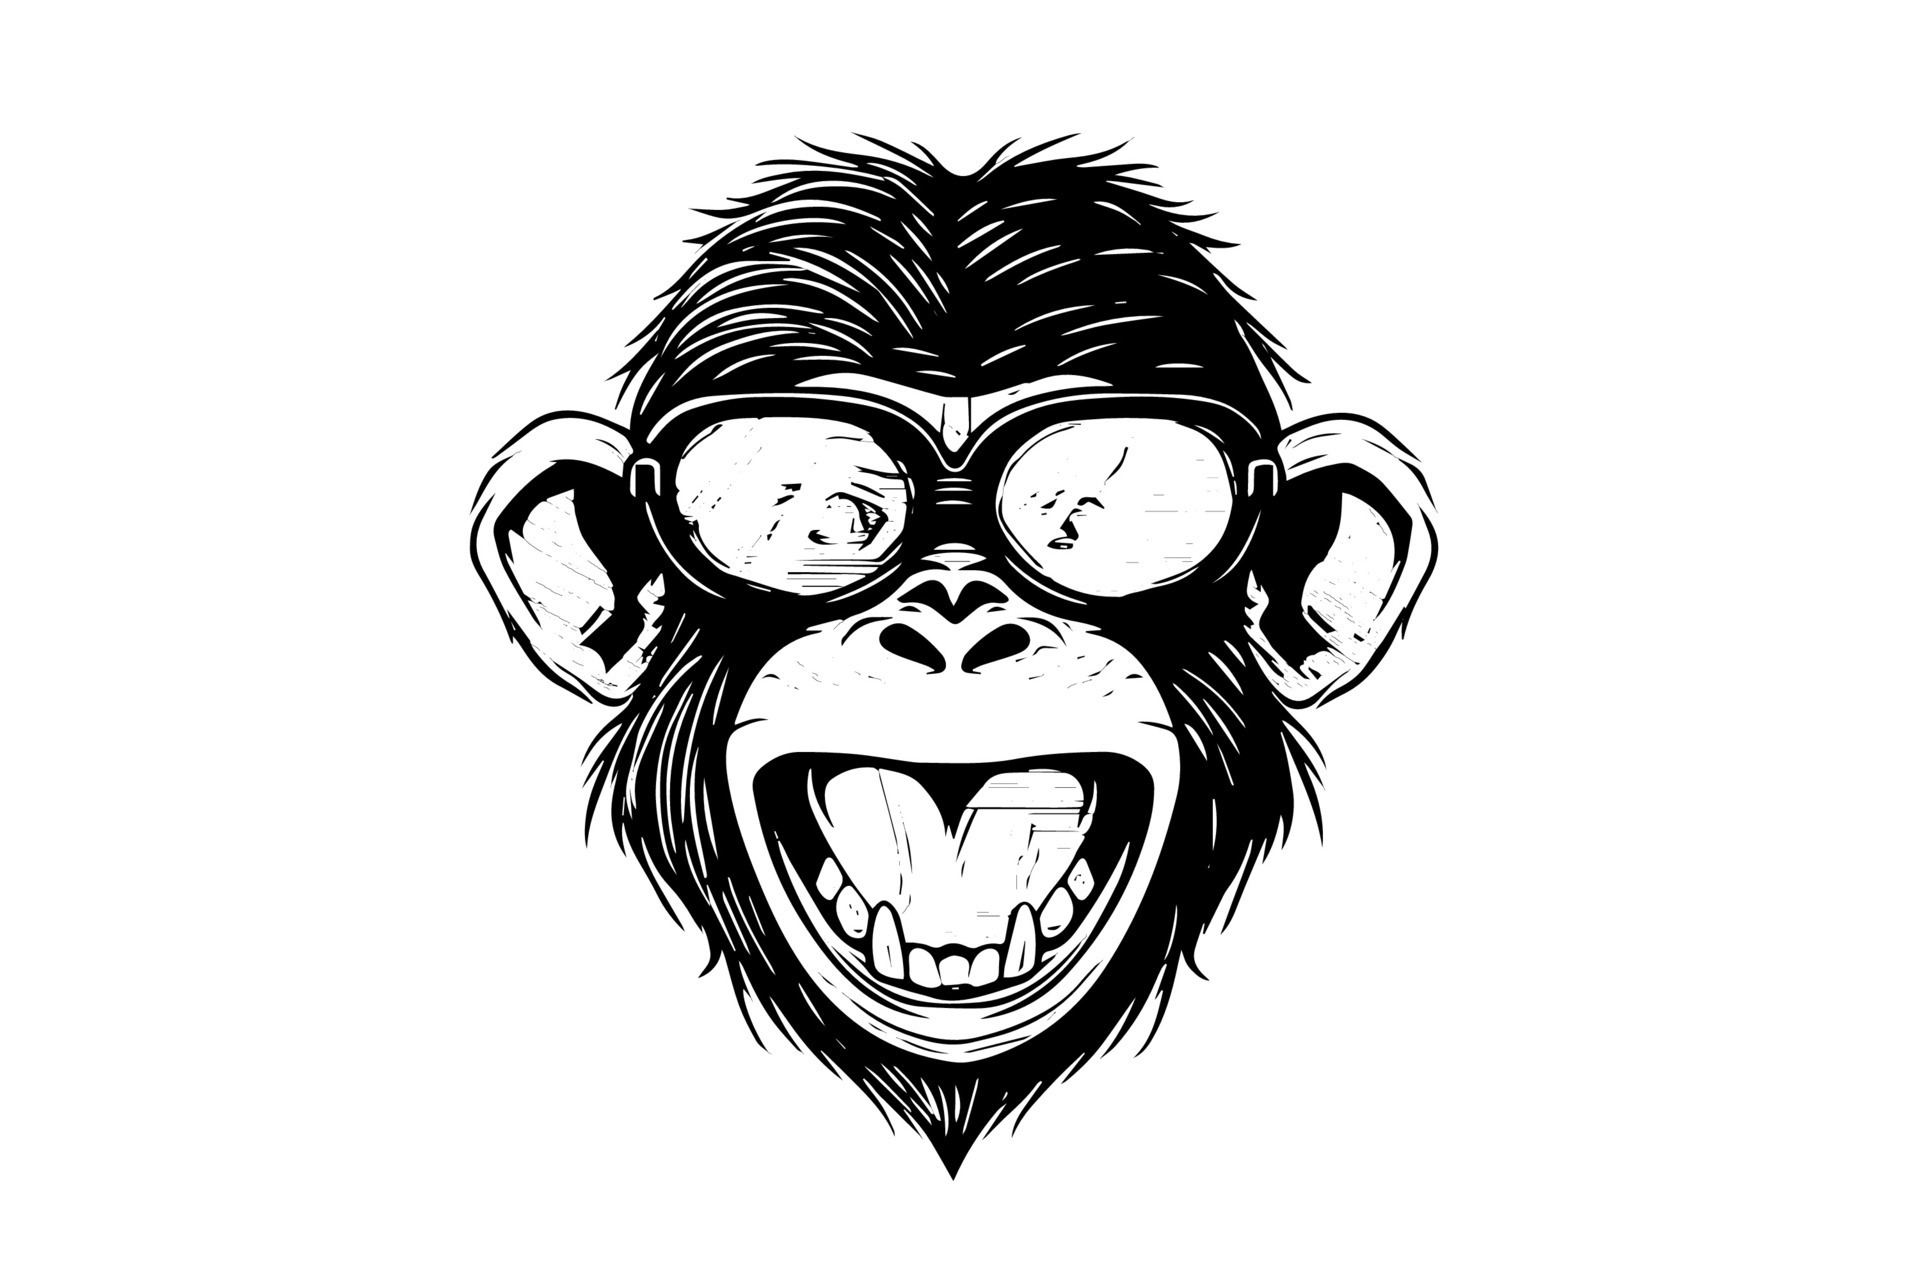 Pictures Of Monkeys For Kids Monkey Drawing For Kids  Animal Cartoon Face   678x600 PNG Download  PNGkit